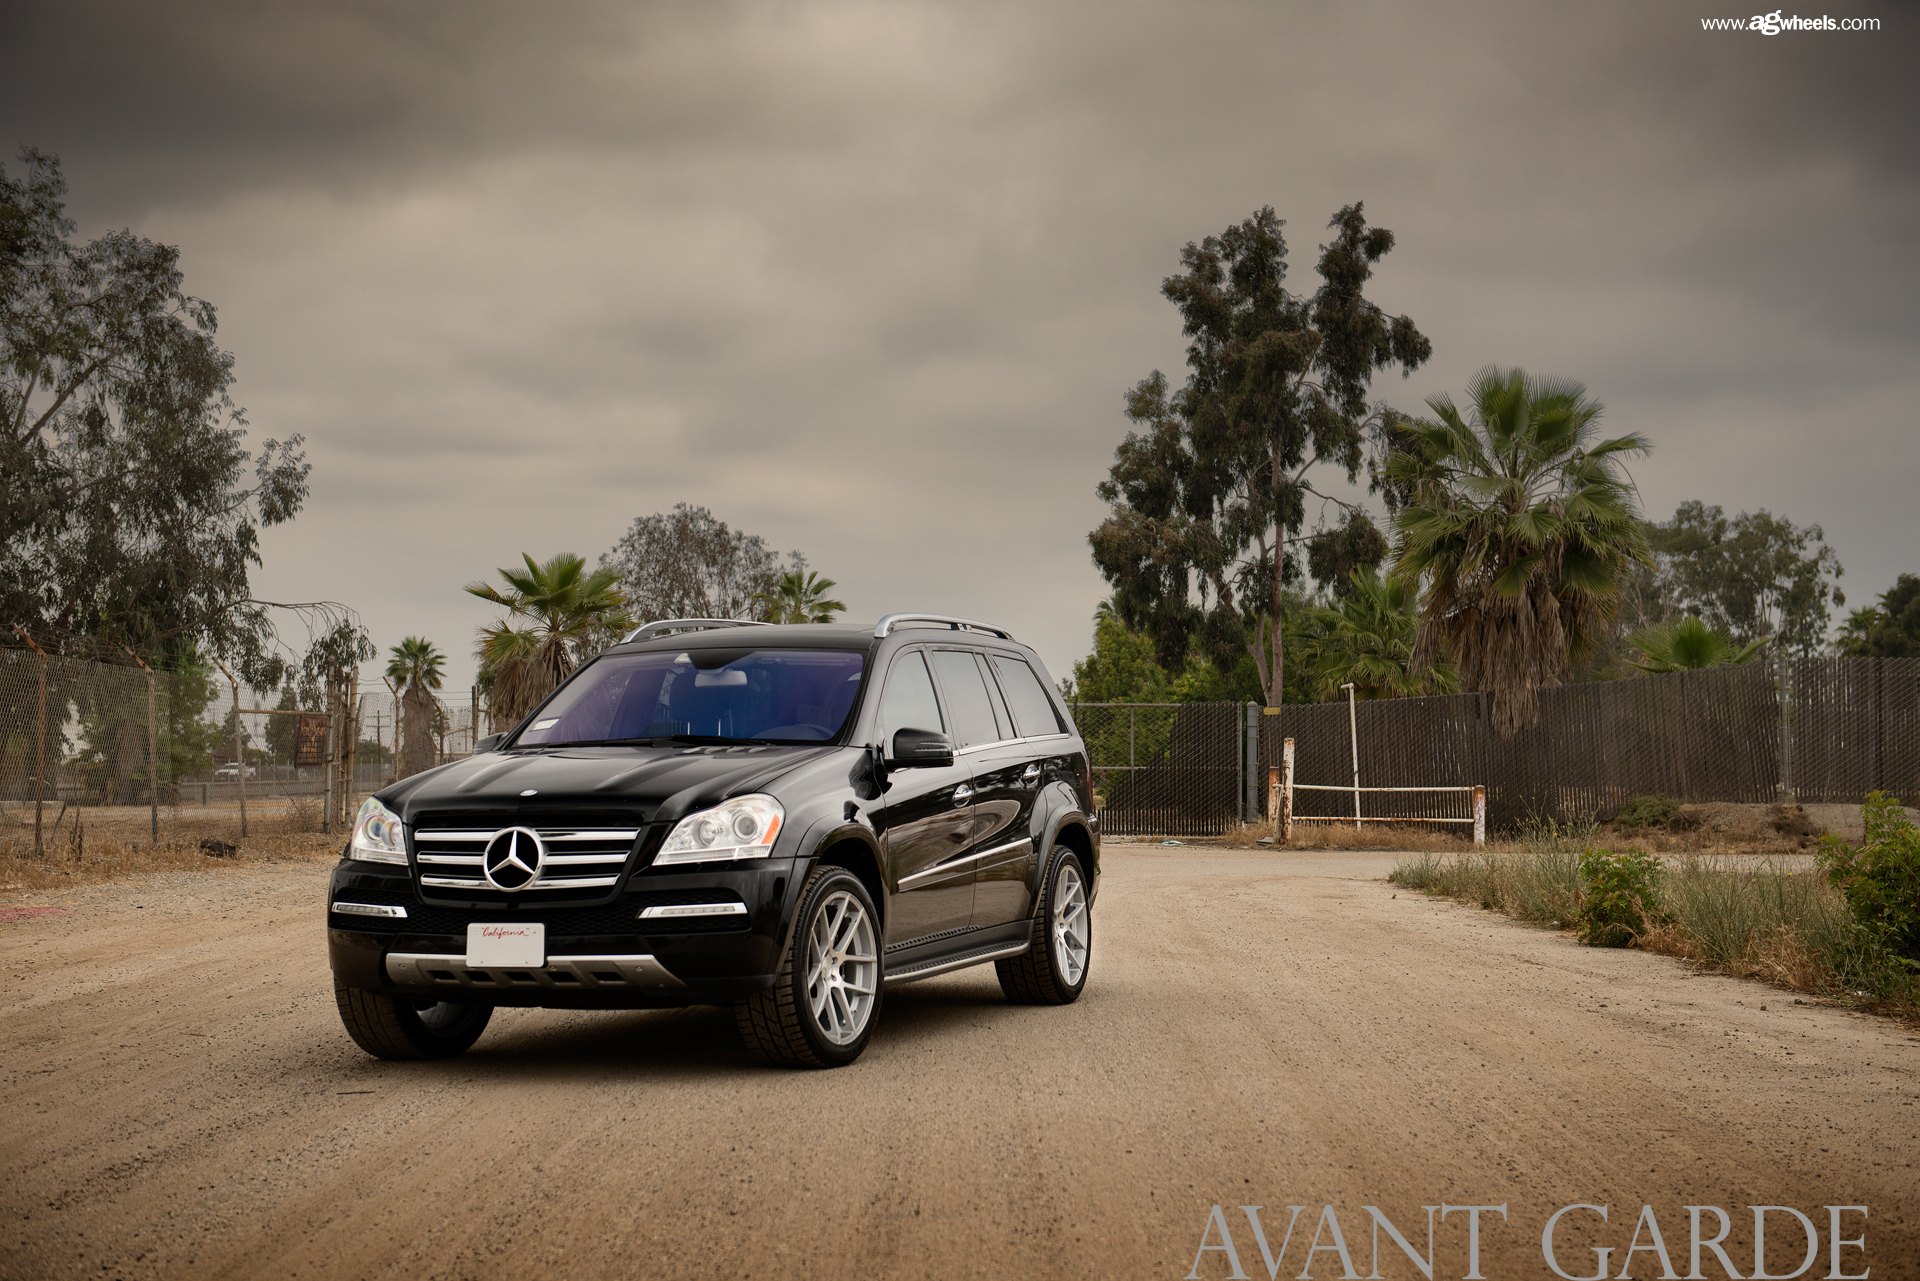 Black Mercedes GL-Class with Chrome Grille - Photo by Avant Garde Wheels